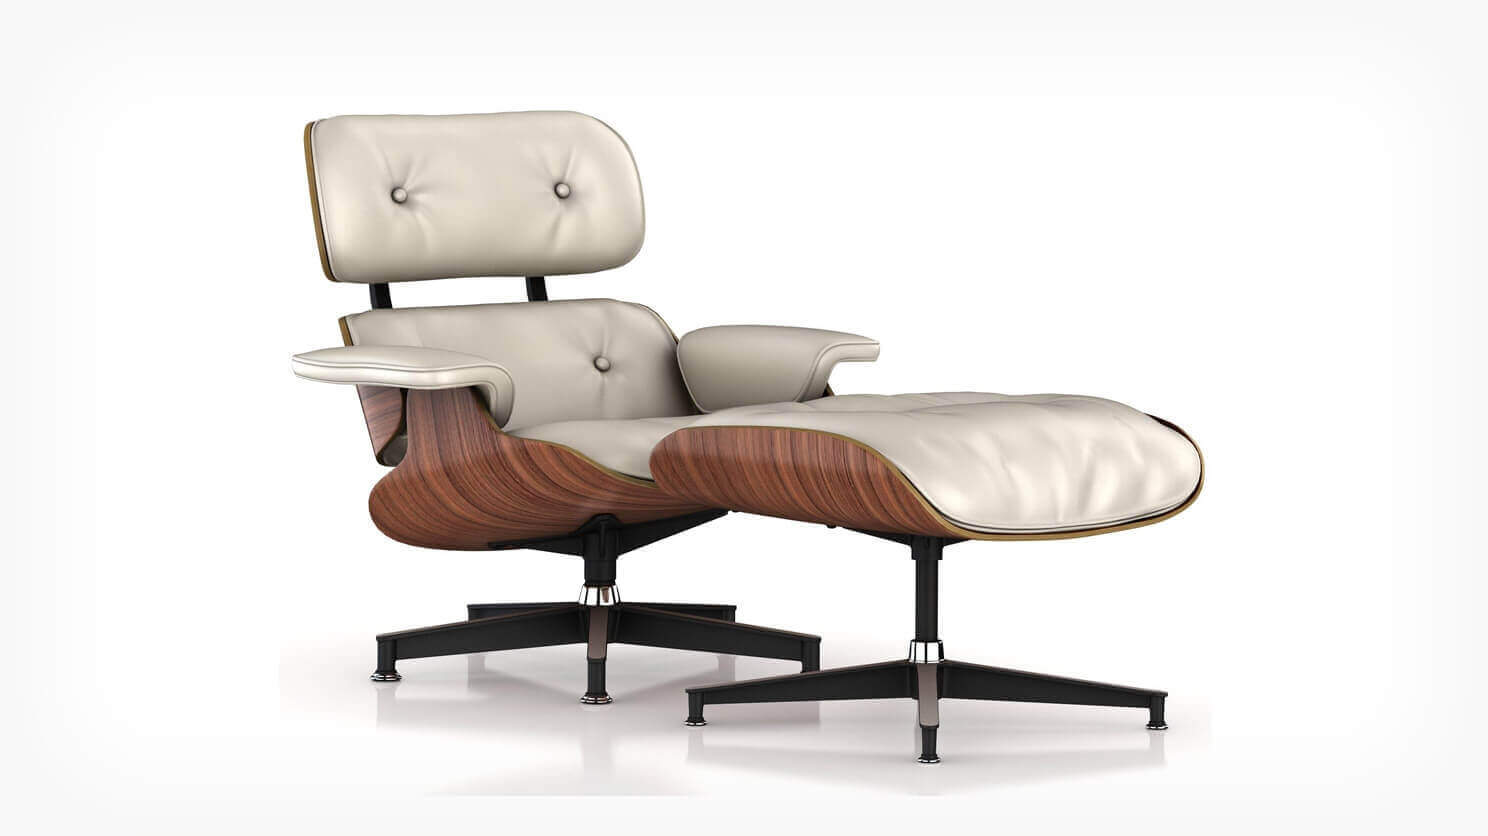 Eames Lounge Chair And Ottoman, Eames Leather Lounge Chair